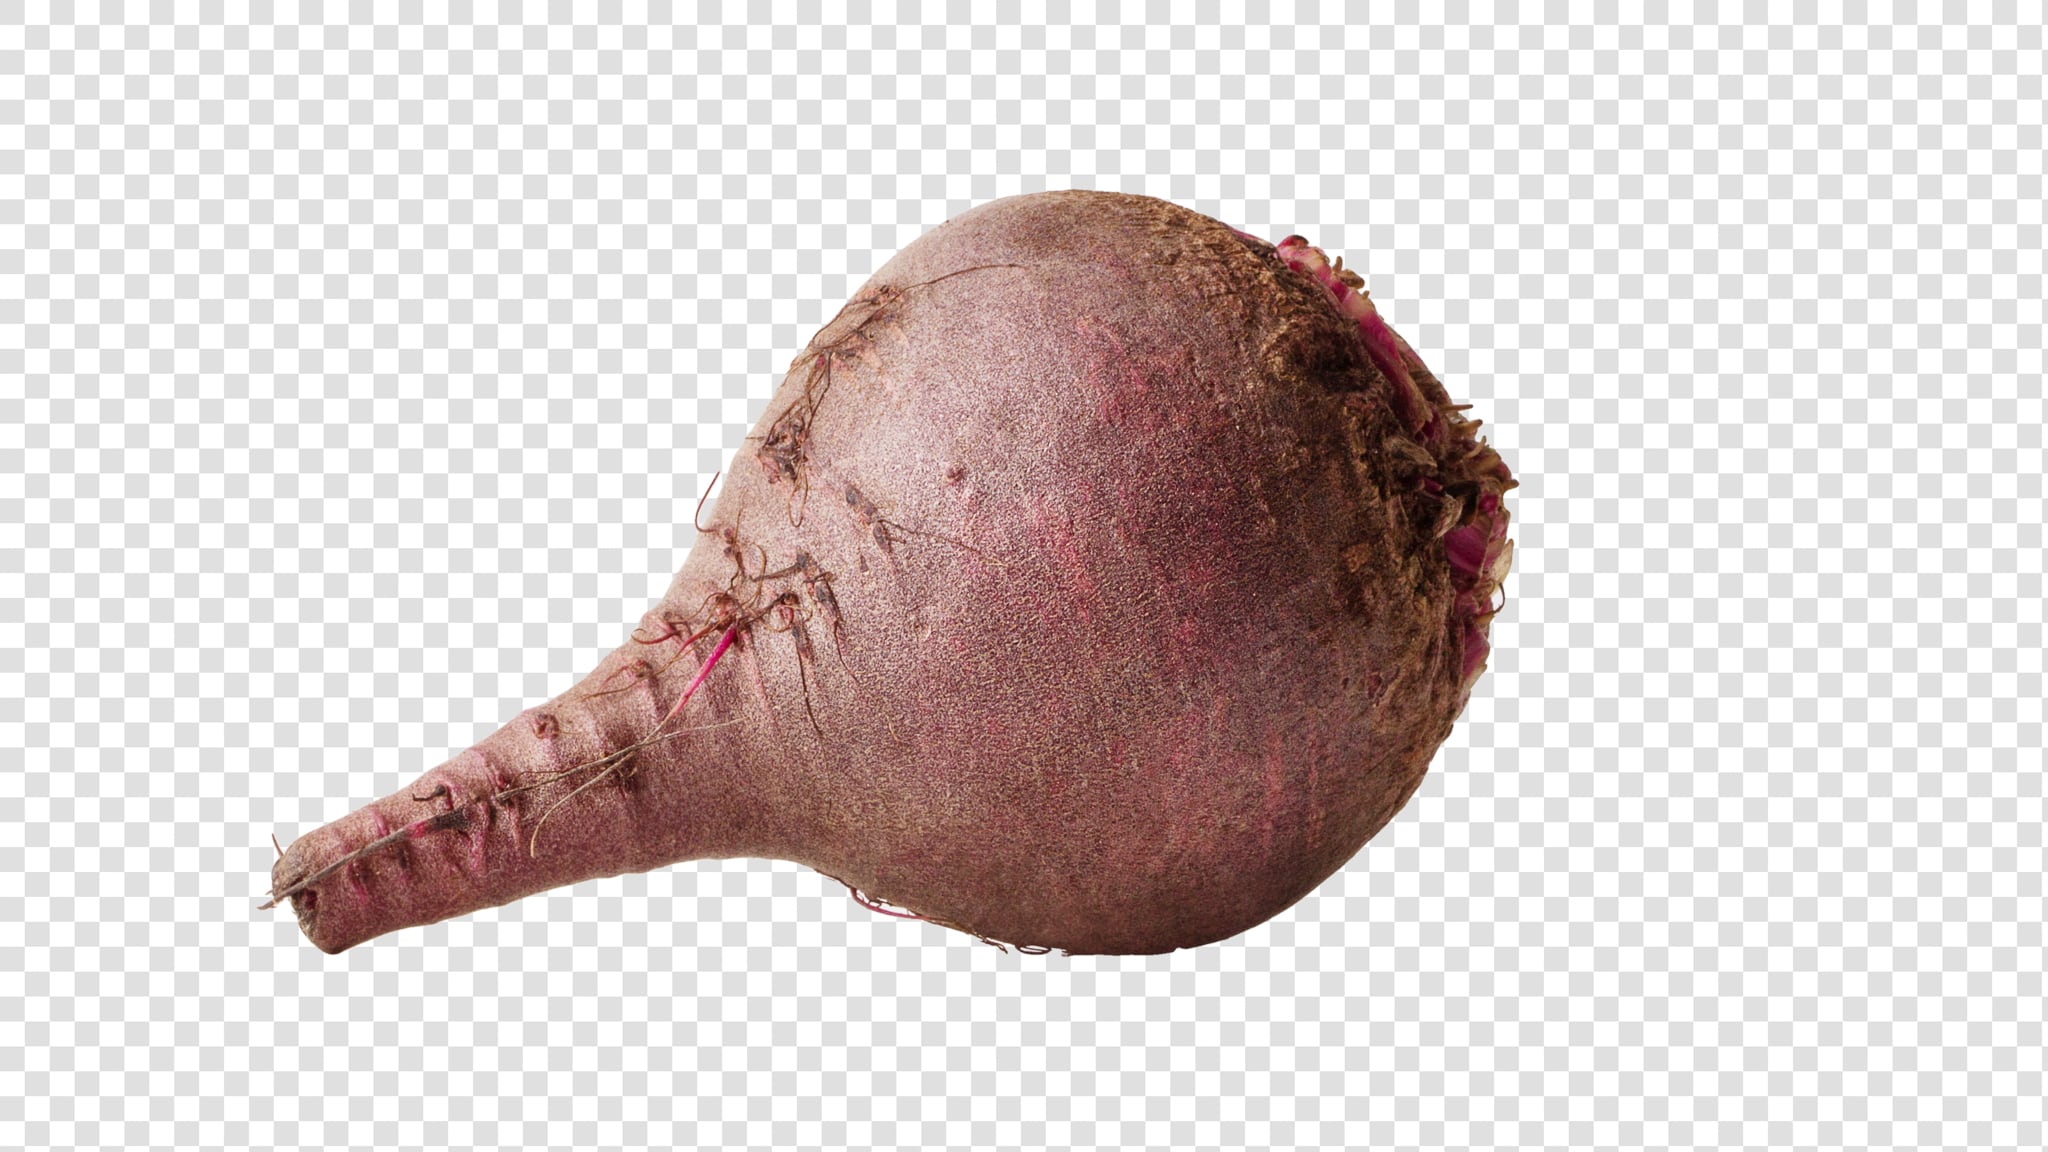 Beet PSD image with transparent background